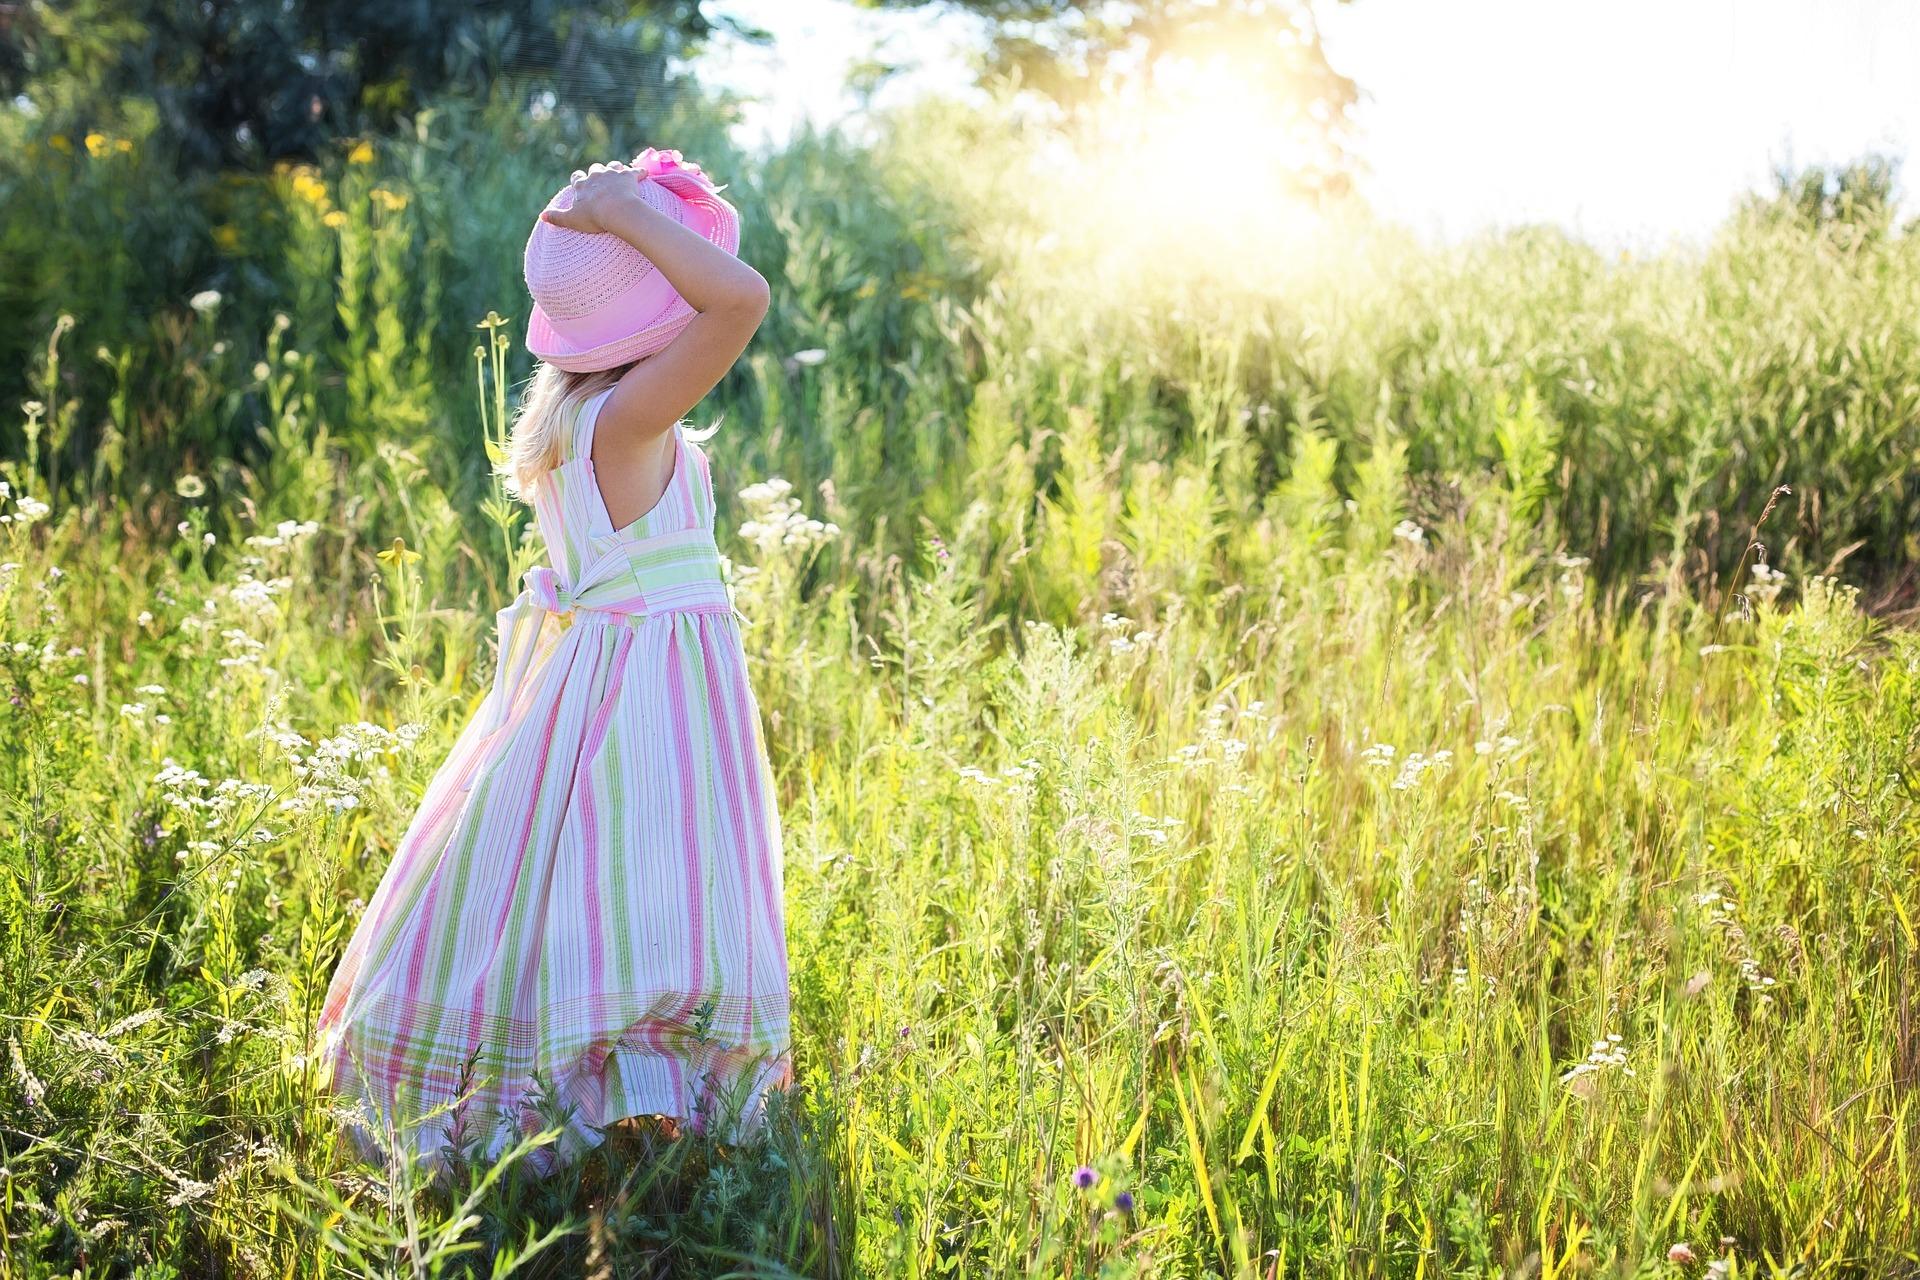 A young girl wearing a pink hat and striped dress standing in a field - Toddler adoption vs newborn adoption - Baby Journey